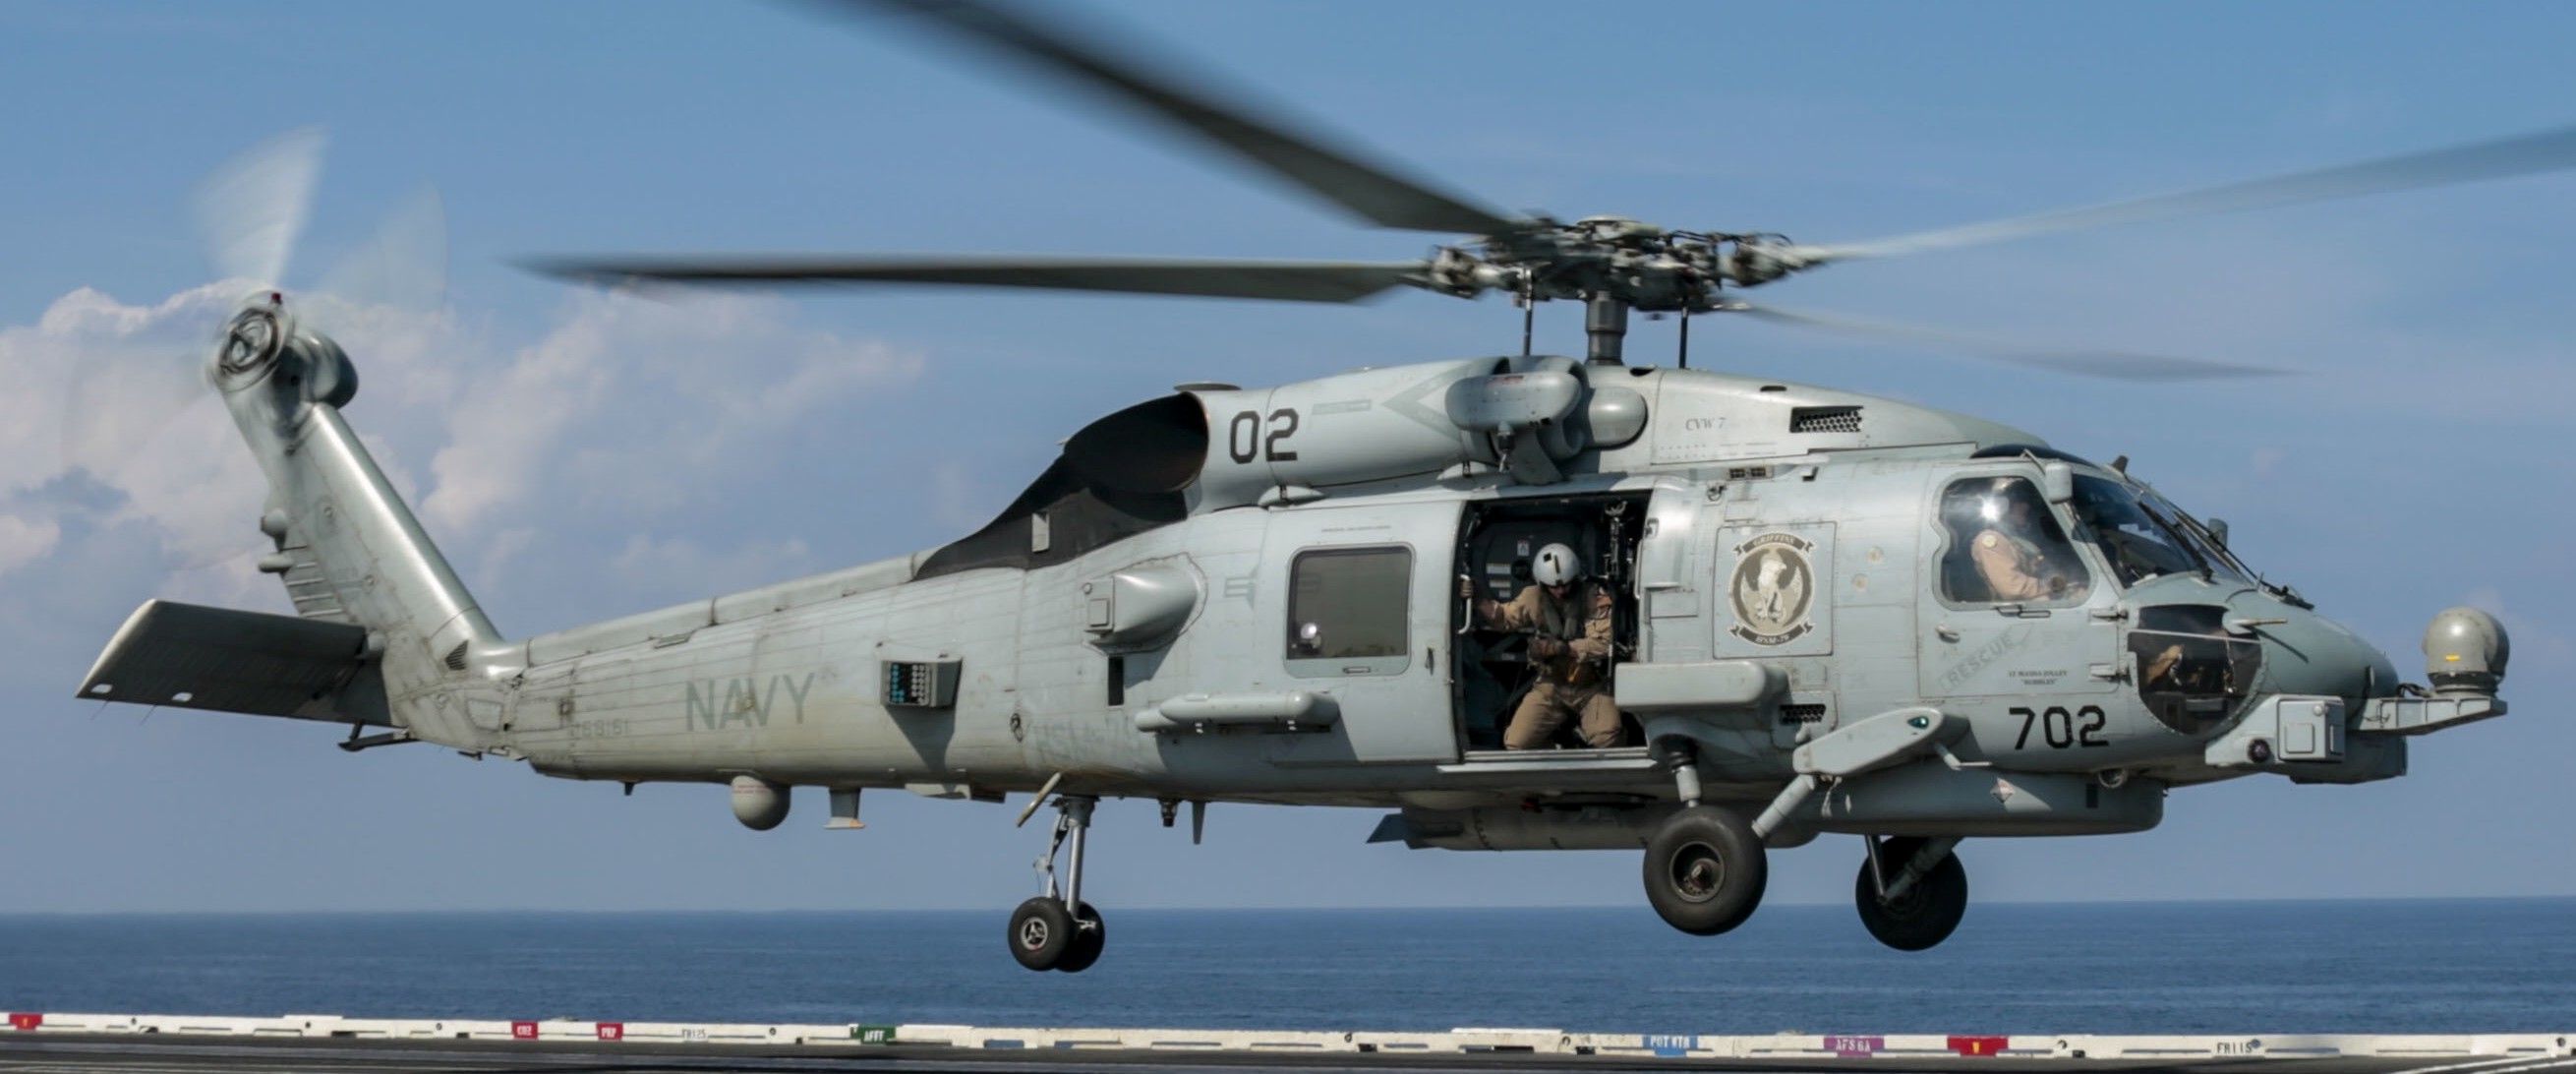 hsm-79 griffins helicopter maritime strike squadron mh-60r seahawk us navy uss abraham lincoln cvn-72 2019